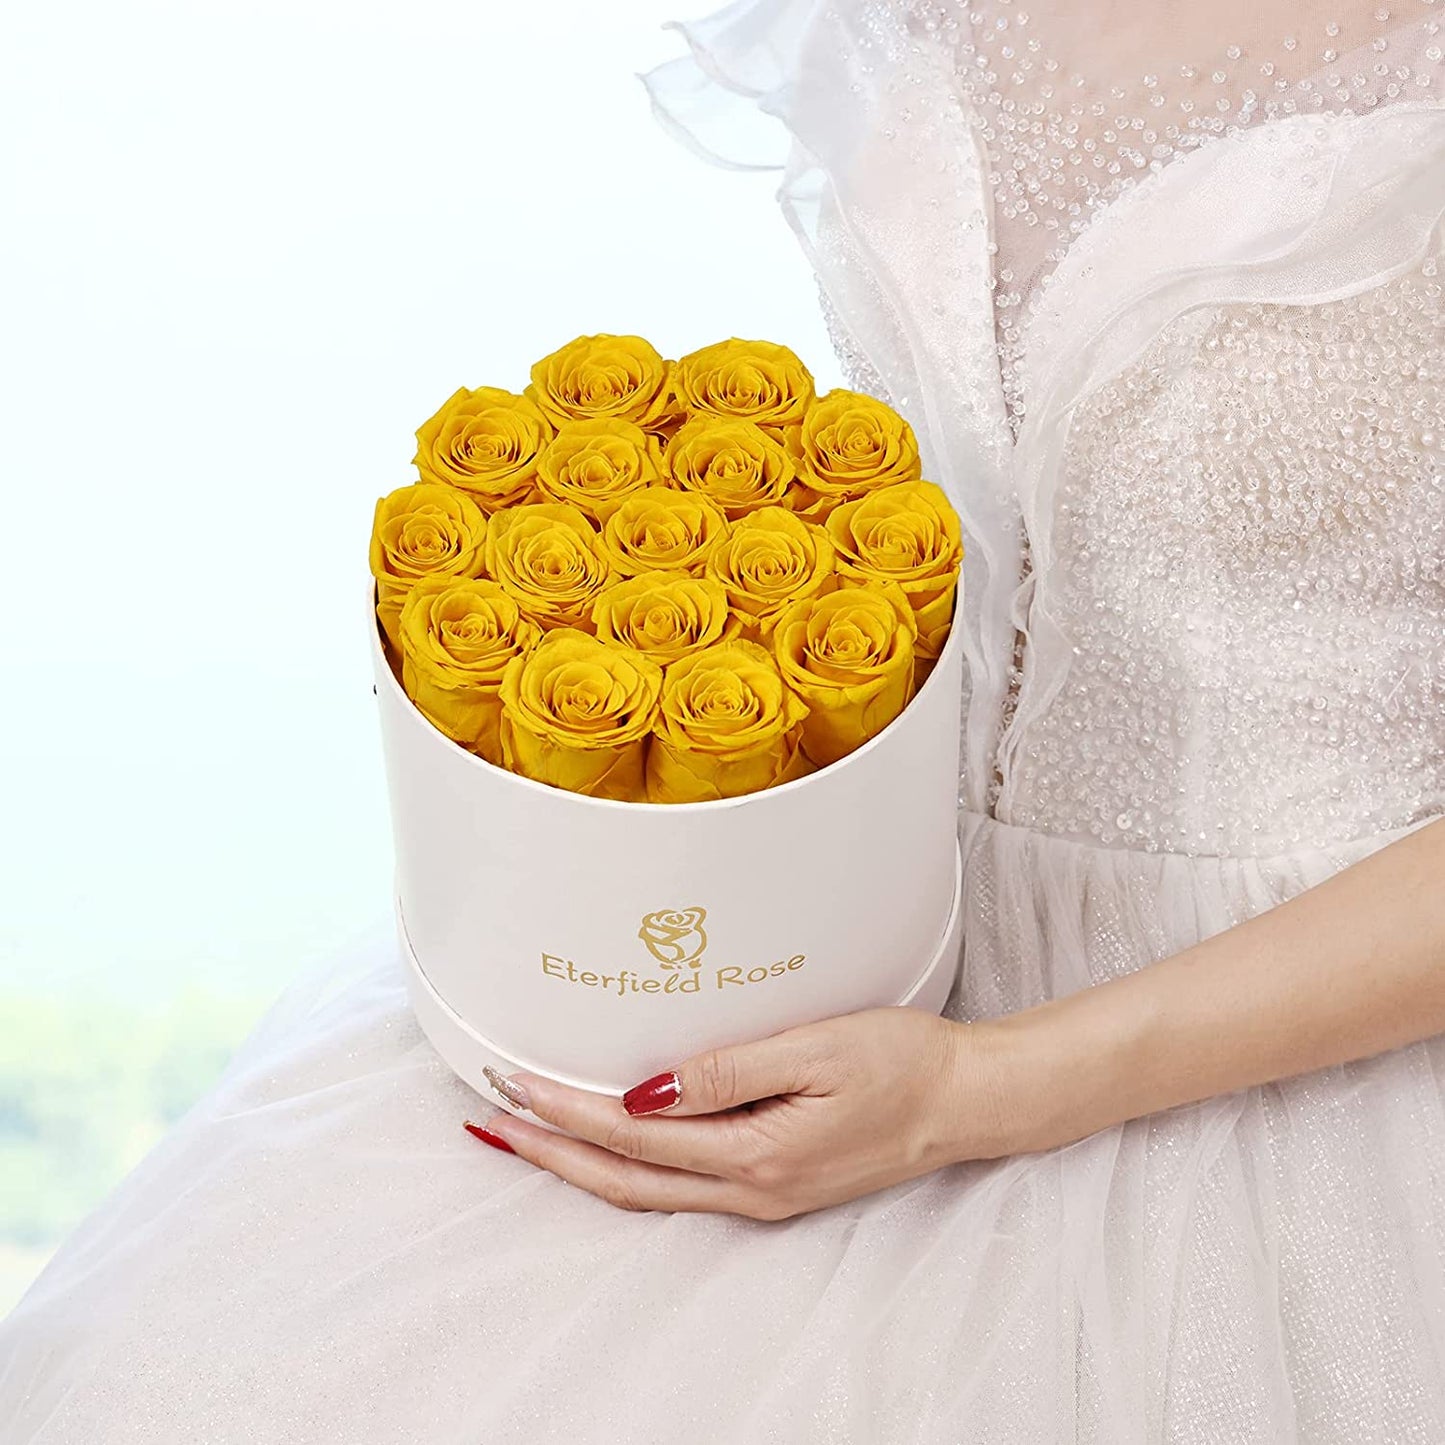 A woman is holding a box of yellow colored roses that last a year.